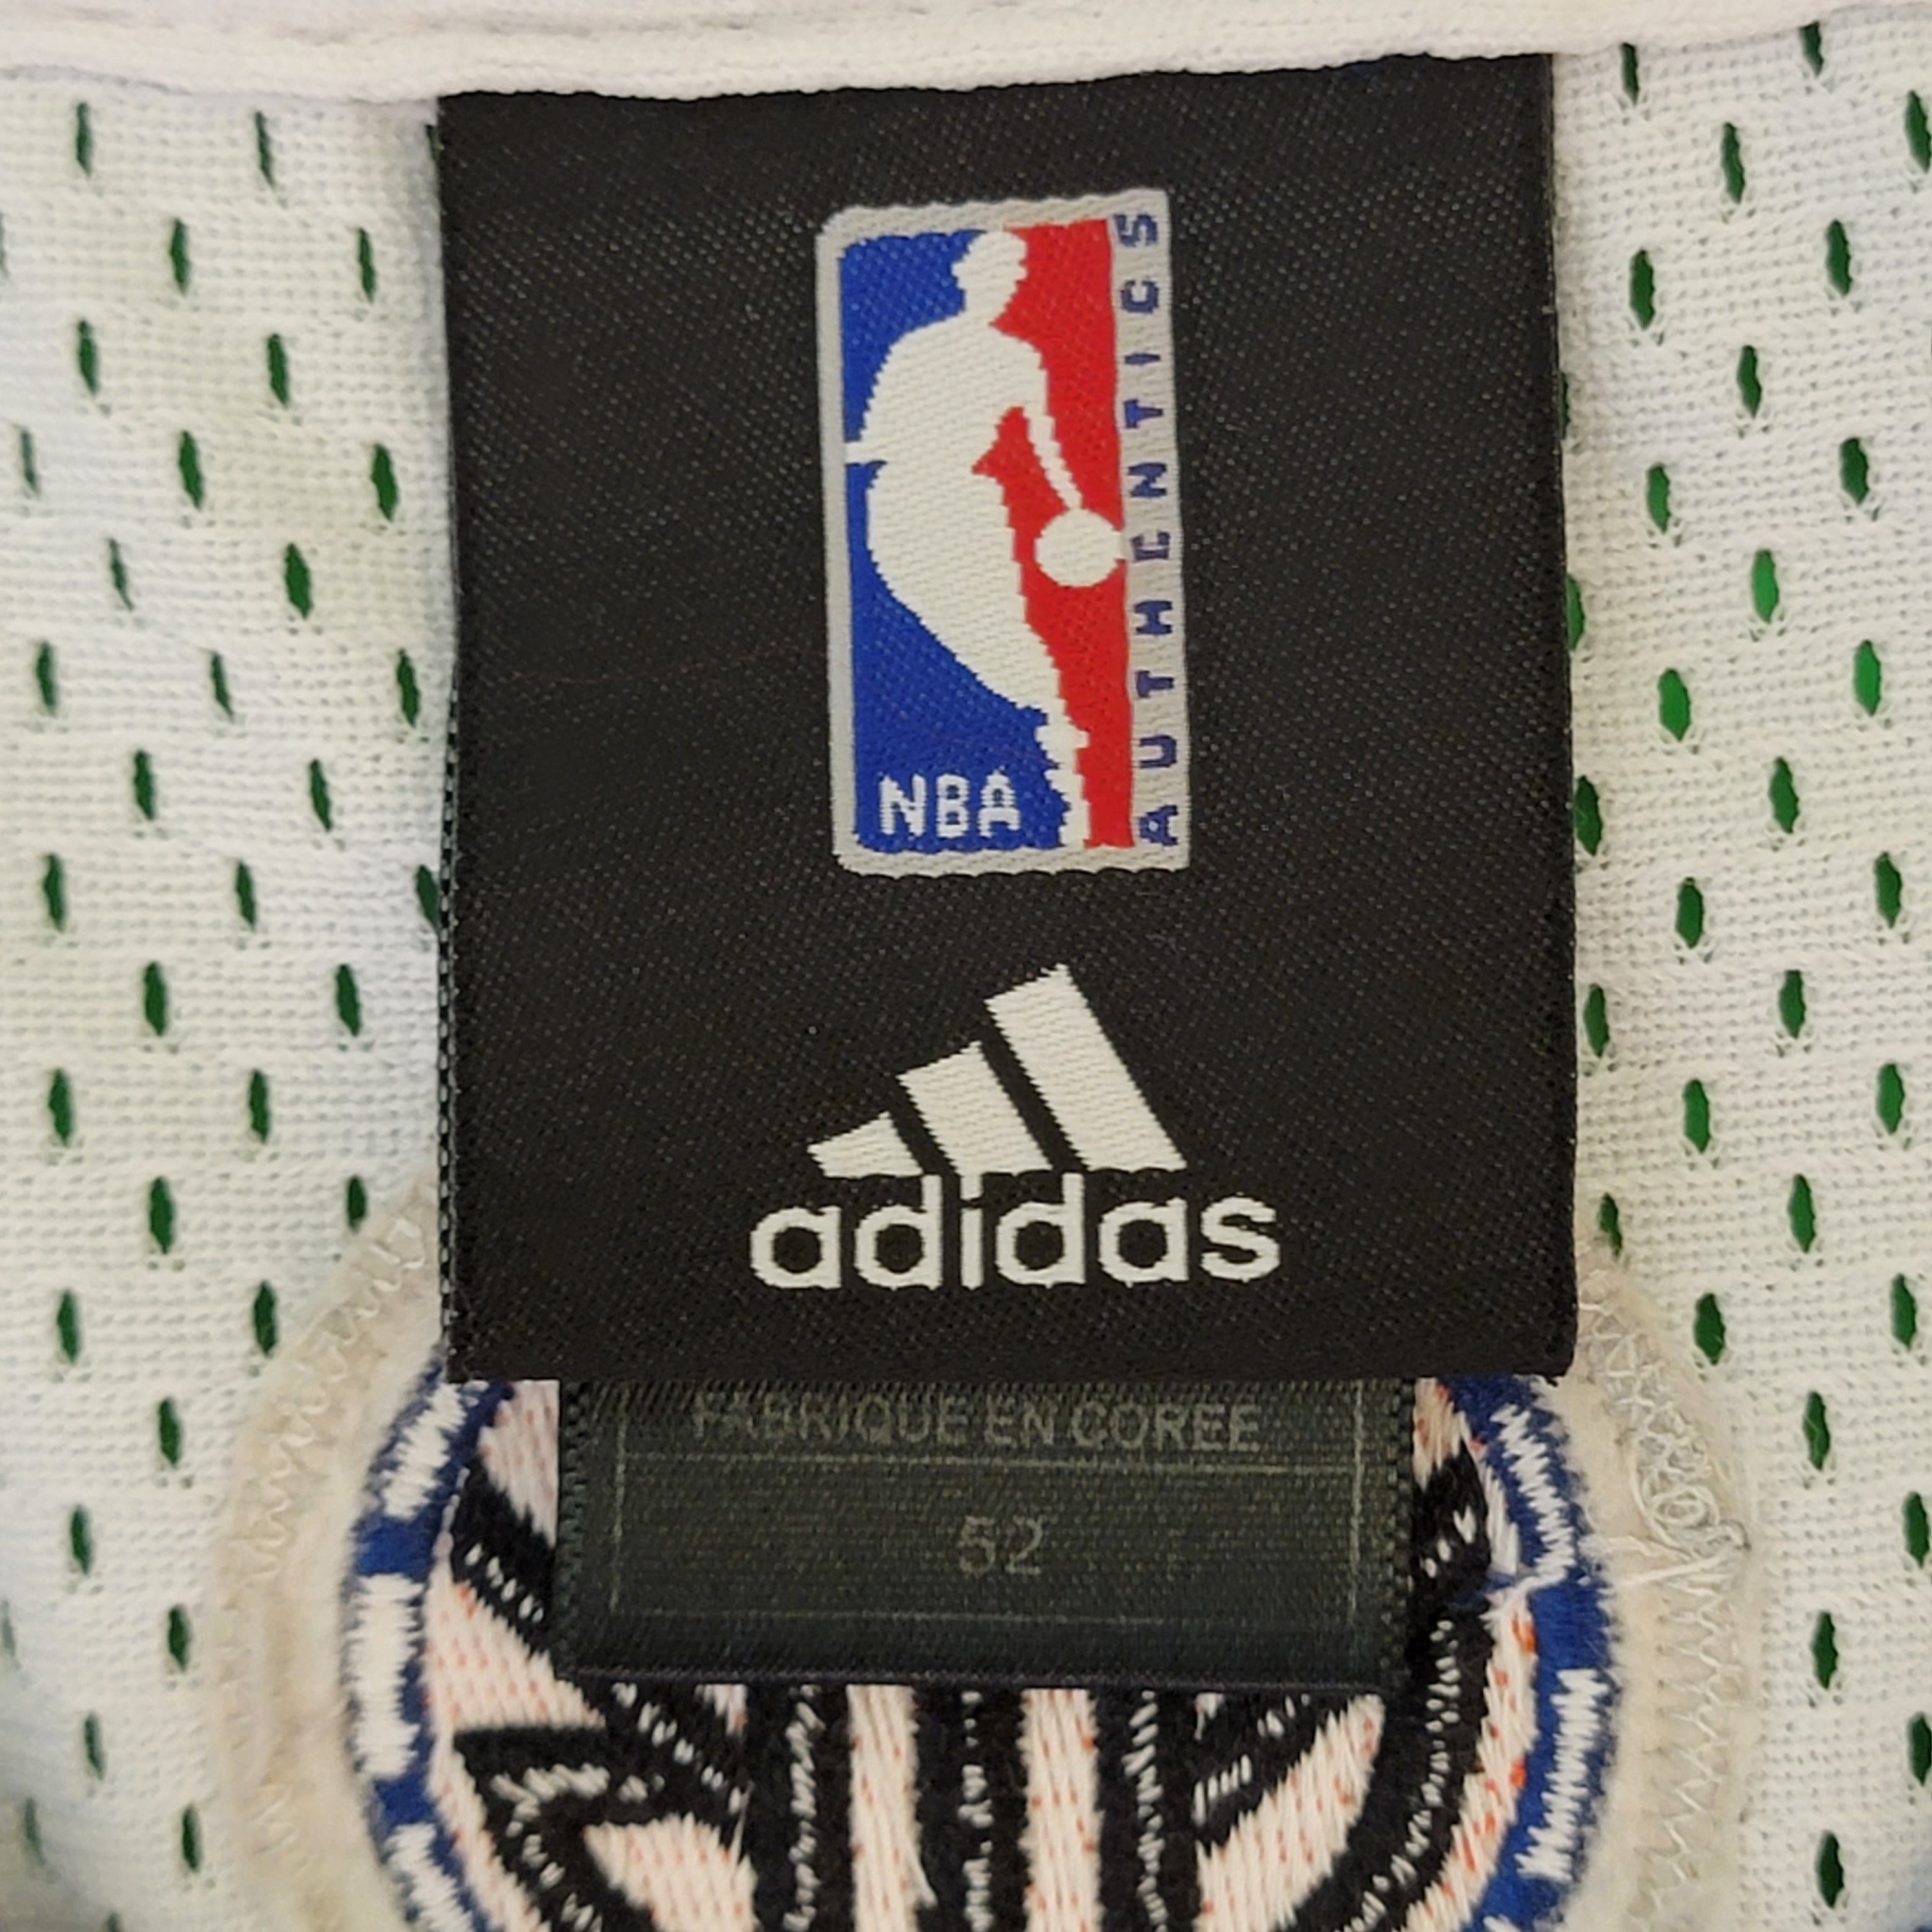 2010-12 New York Knicks Stoudemire #1 adidas Away Jersey (Excellent) S